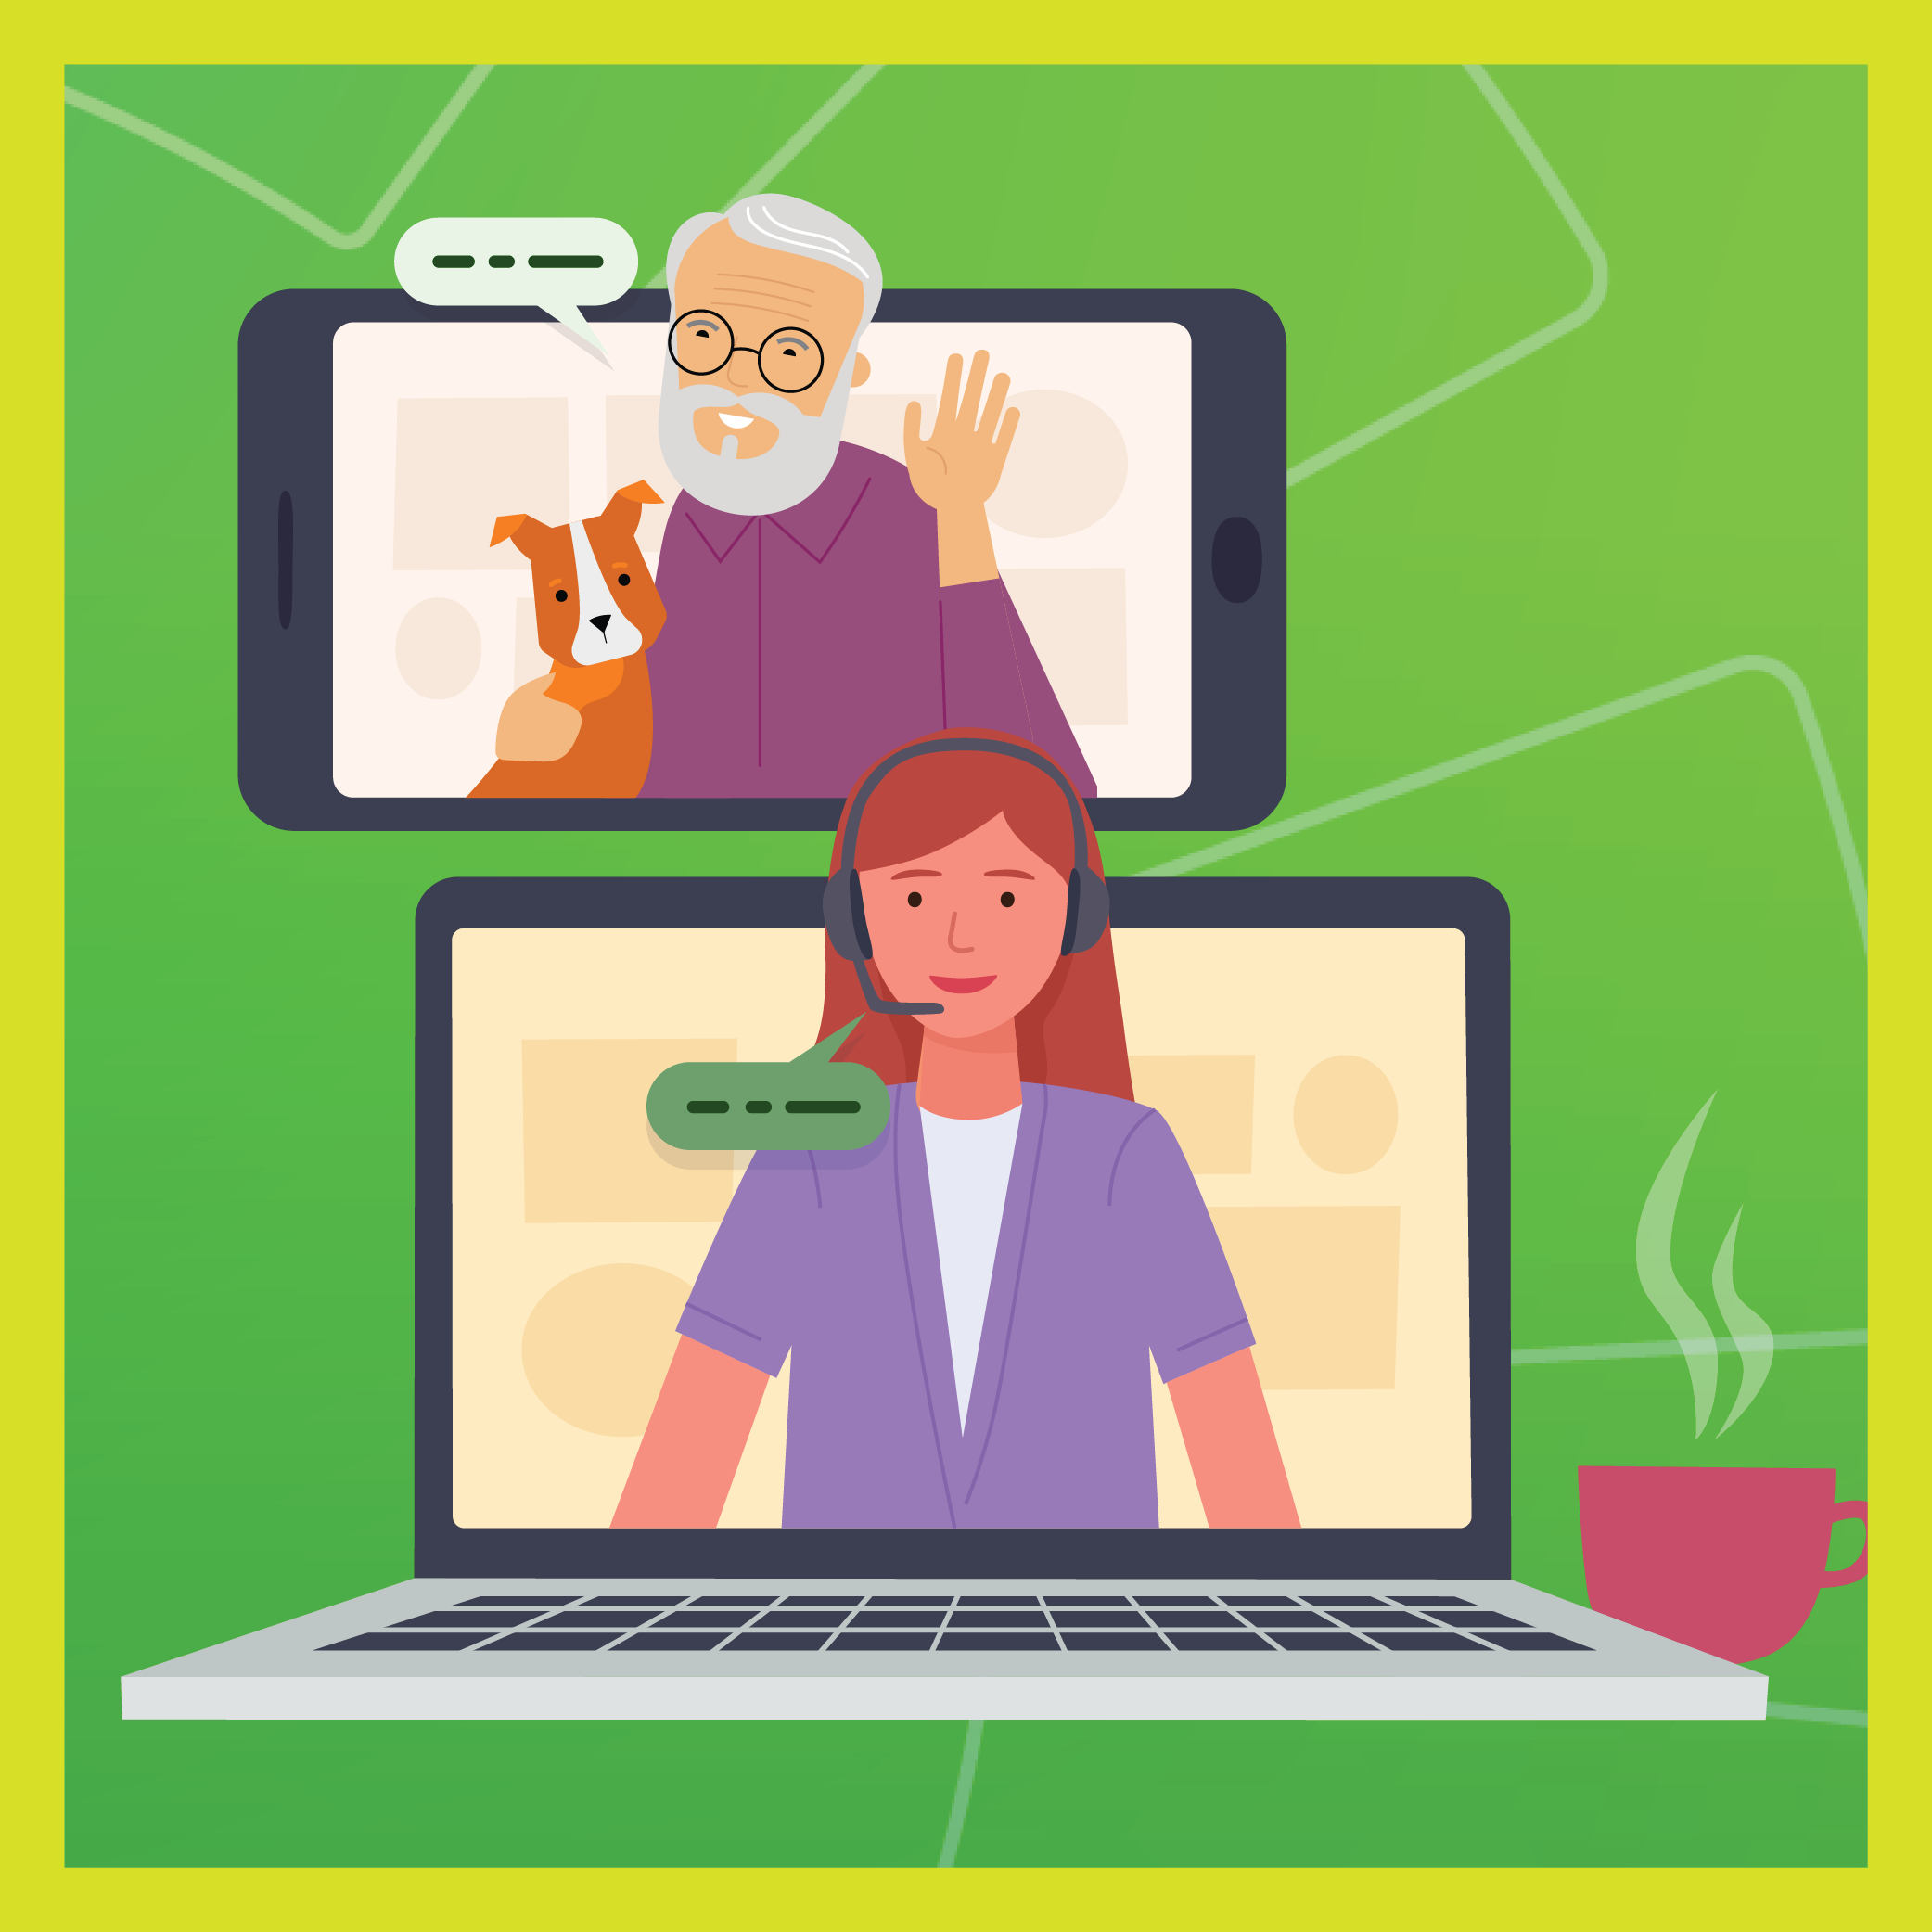 Graphic showing image of a mental health counselor speaking to an elderly man with a dog using video conferencing technology - a computer with a camera